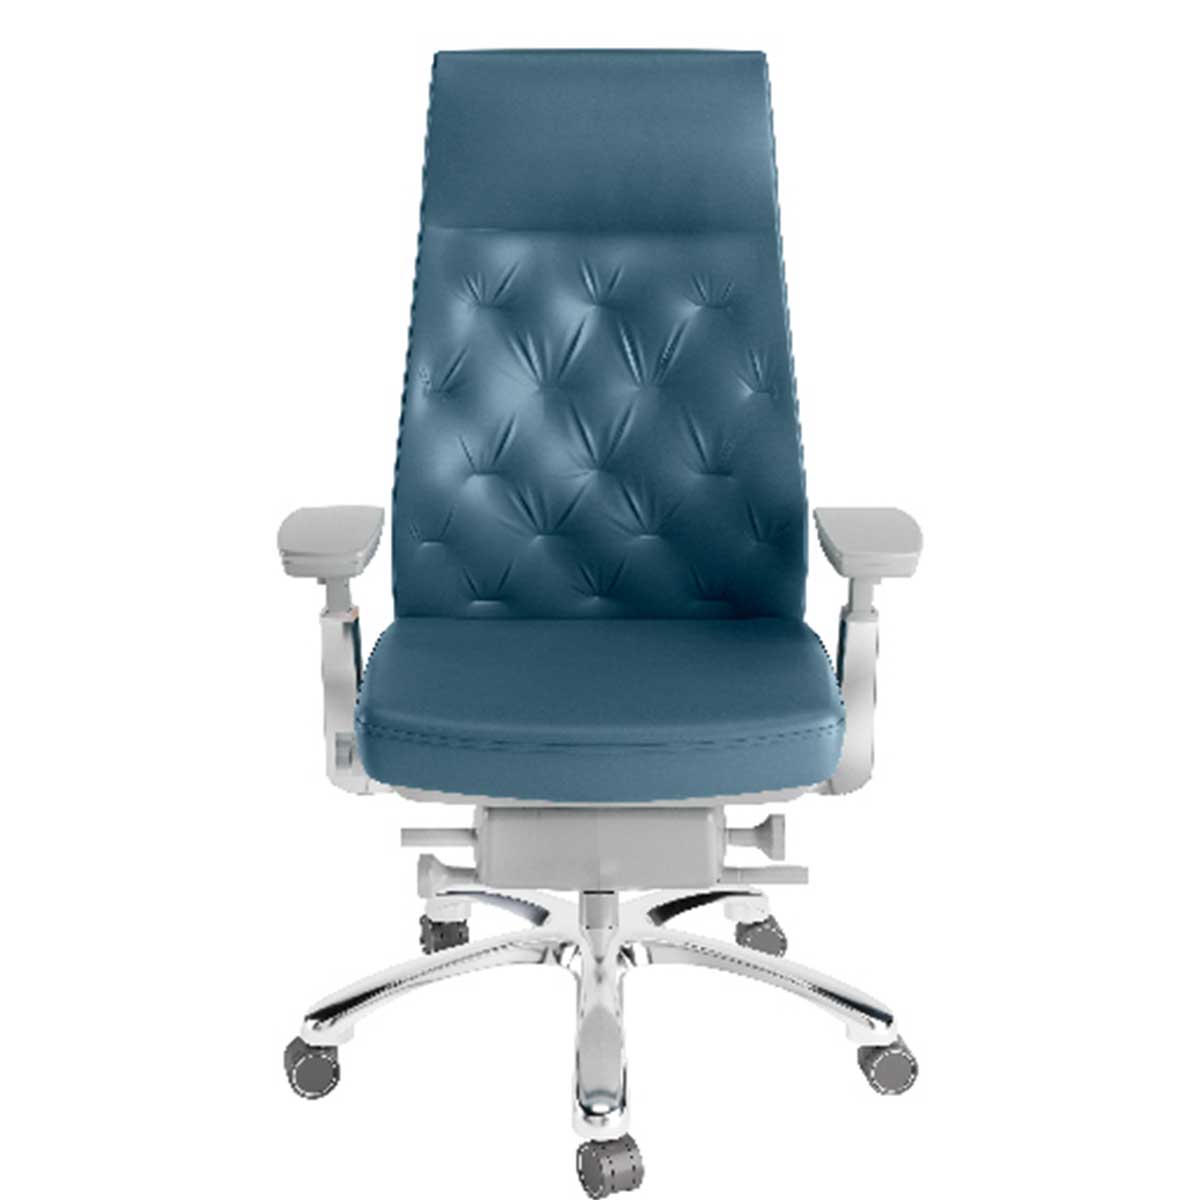 Boss Chair Manufacturers, Suppliers in Sahibabad